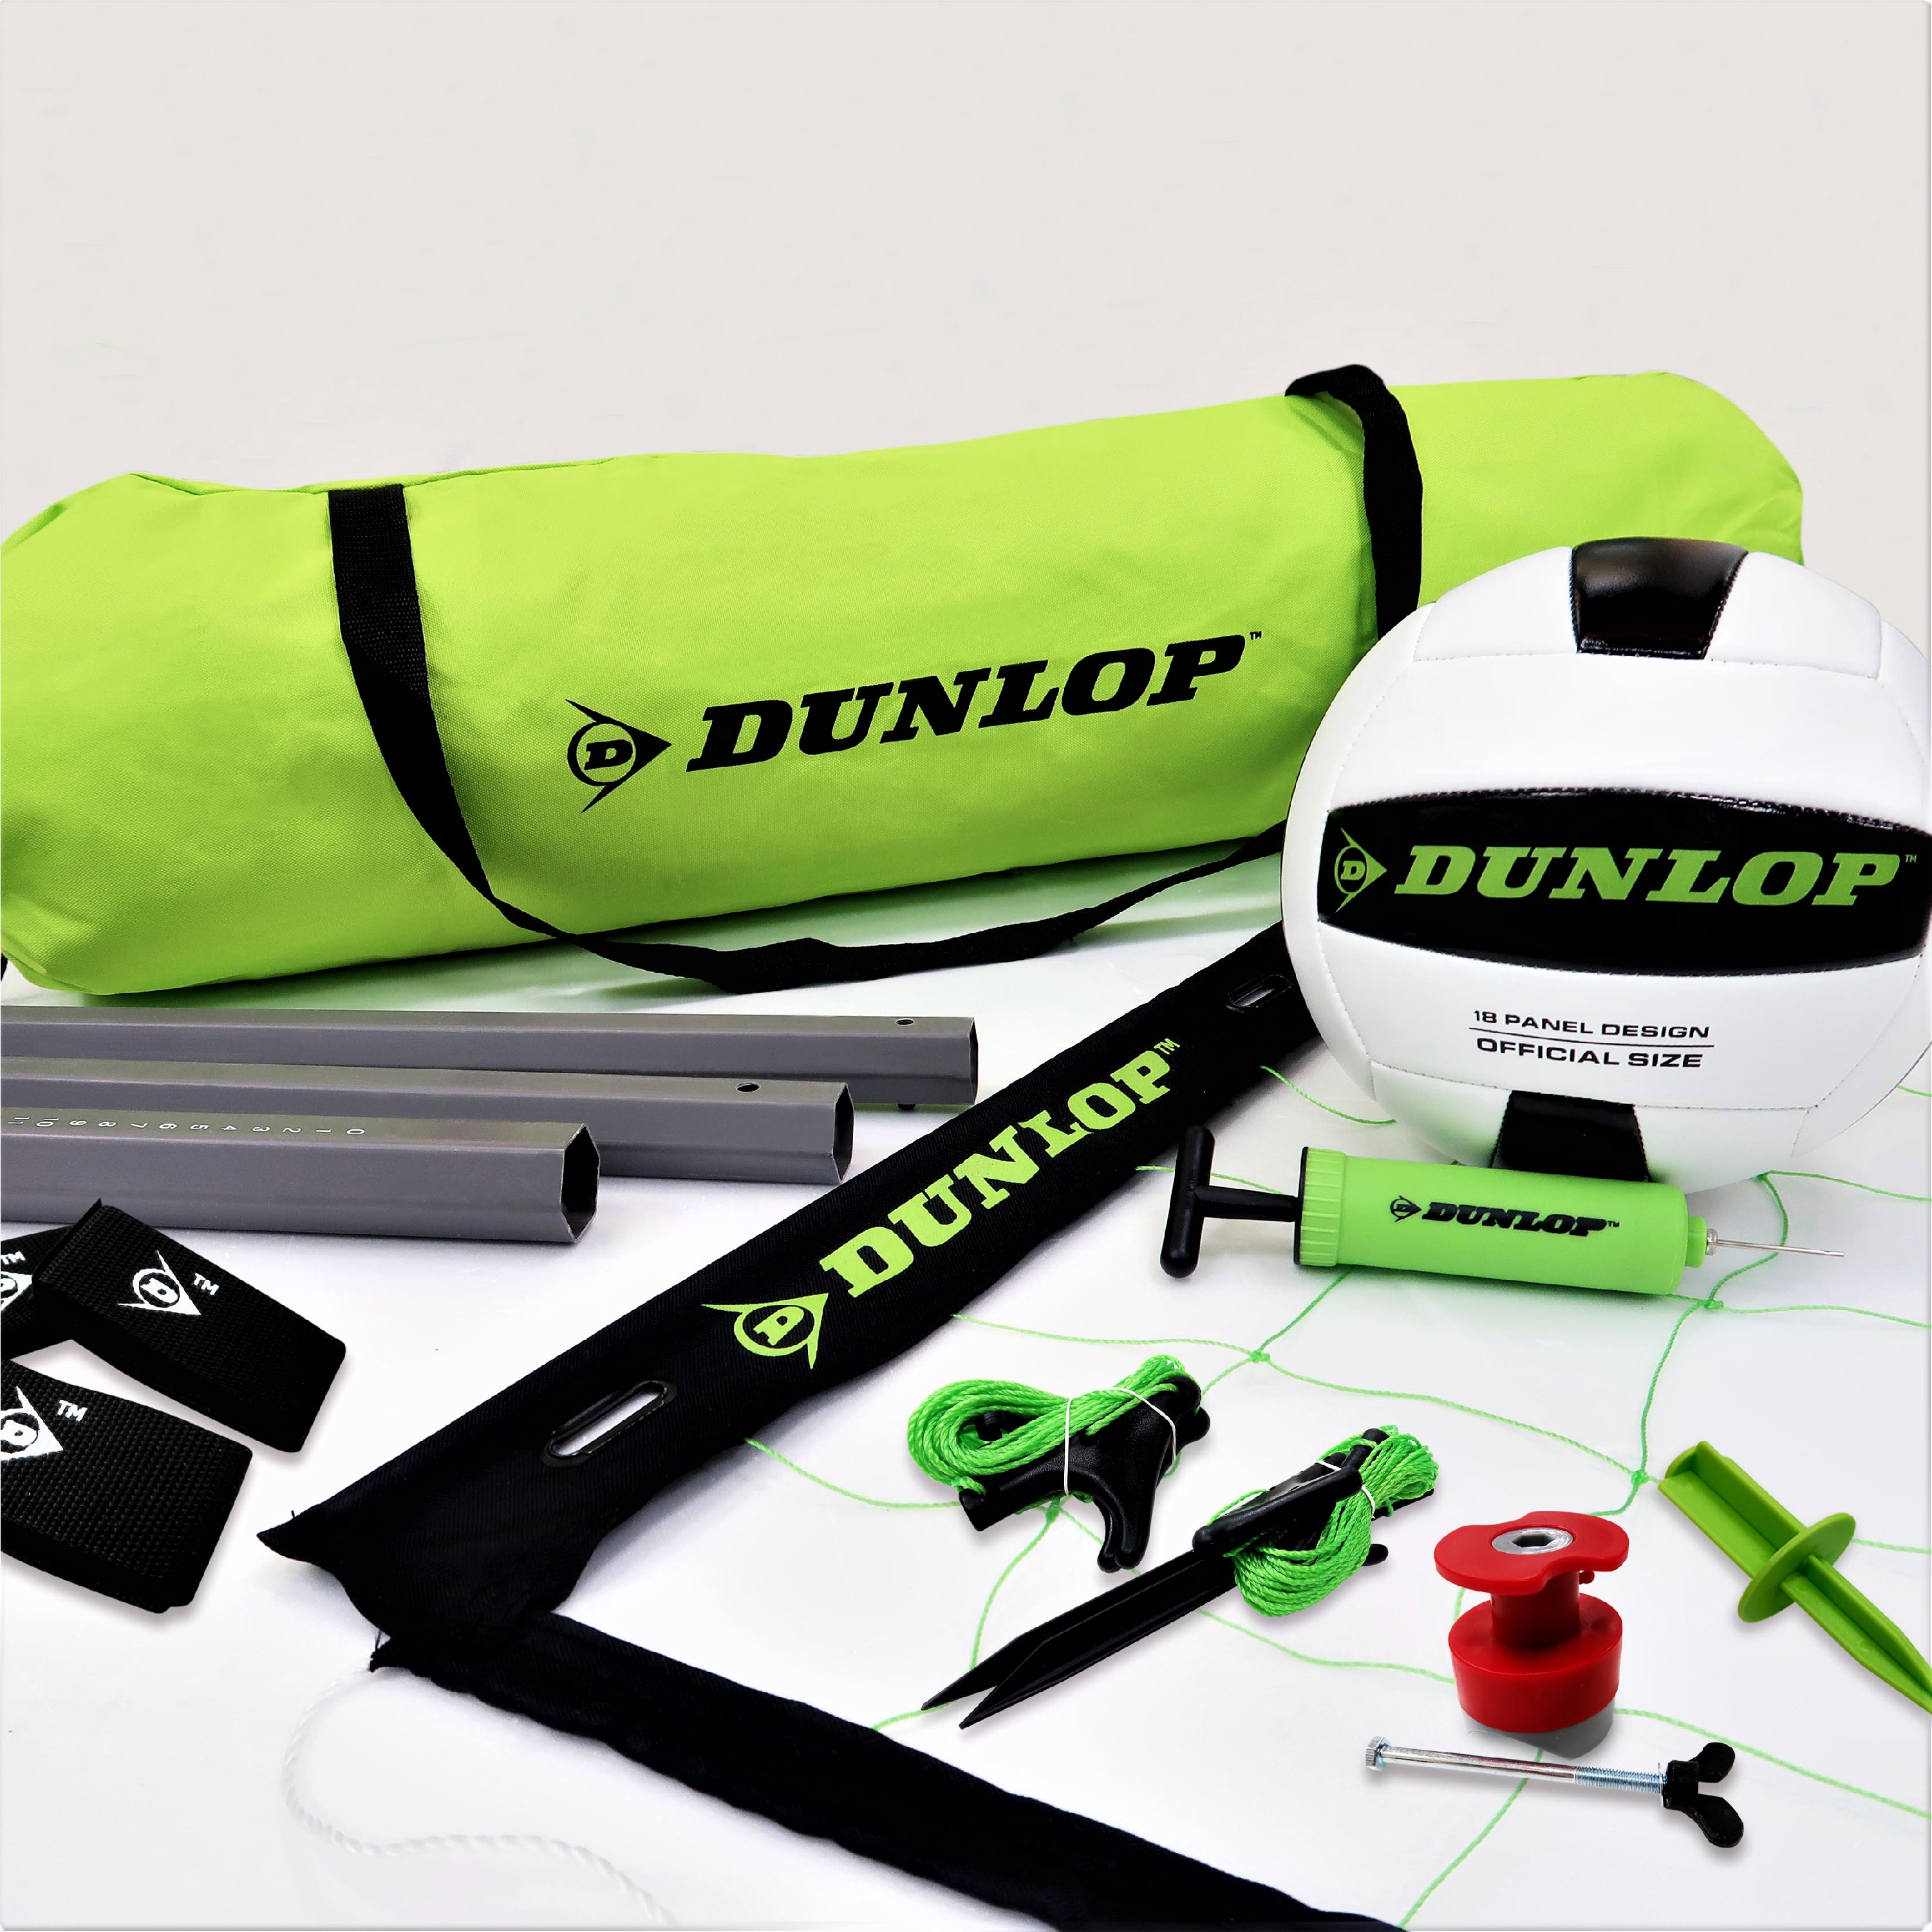 Dunlop Quick Setup Competitive Outdoor Volleyball Set, Green/Black - image 1 of 9